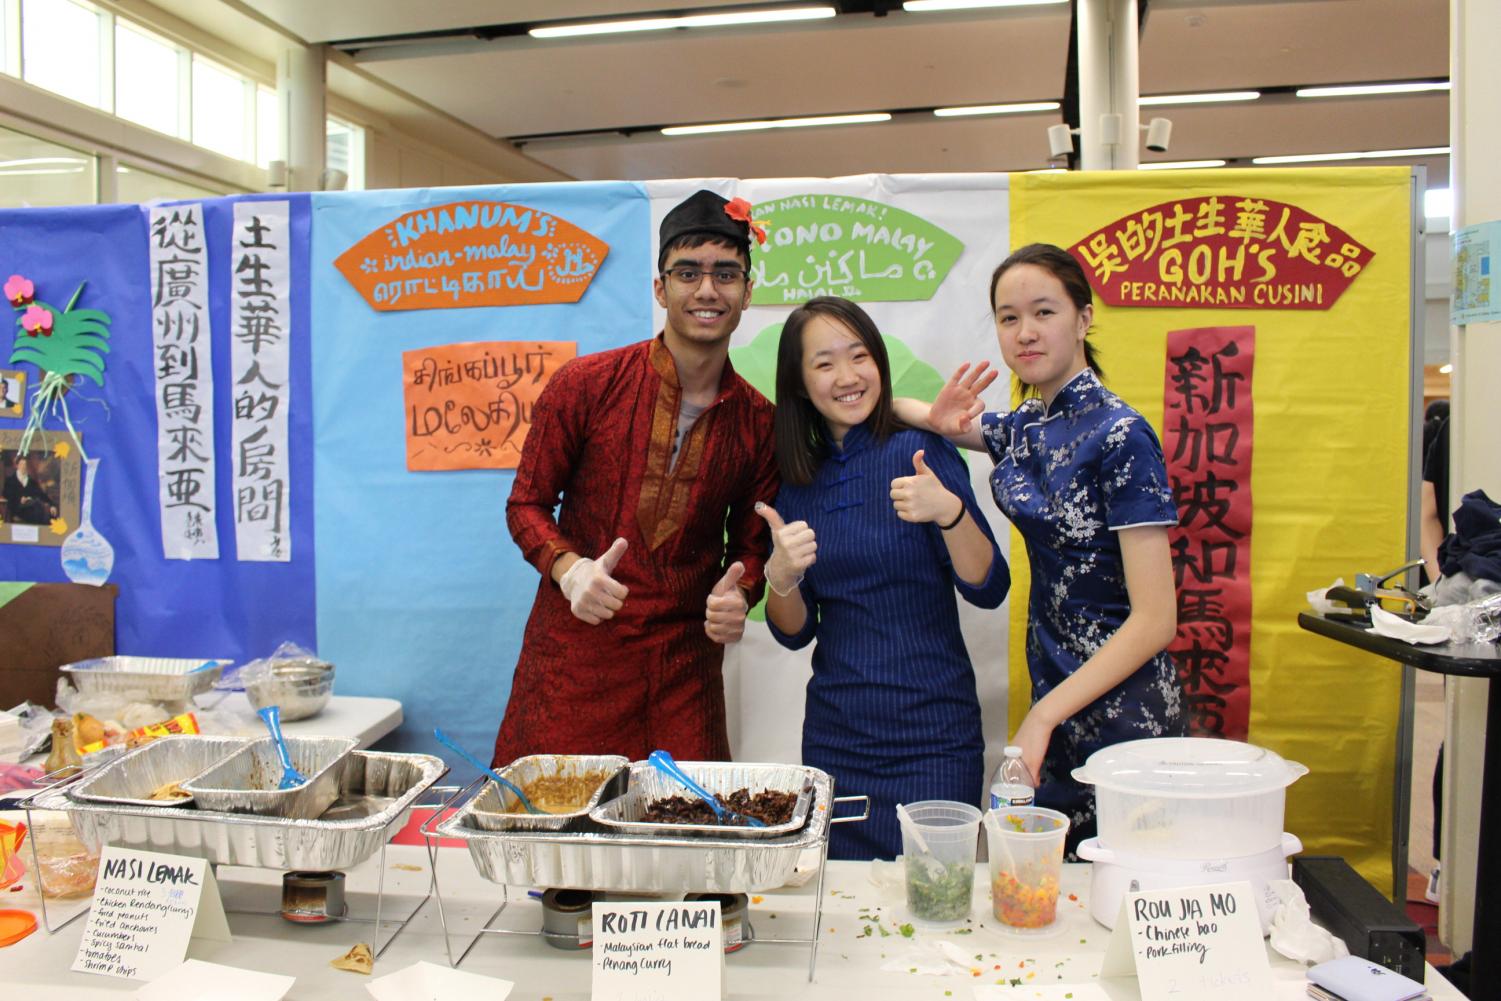 Shisir Bandapalli '21, Diane Bi '21, and Clare Hu '21 all helped out at the Malaysian booth.  They were all eager to share Malaysian cuisine: Nasi lemak, roti lani, and rou jia mo.